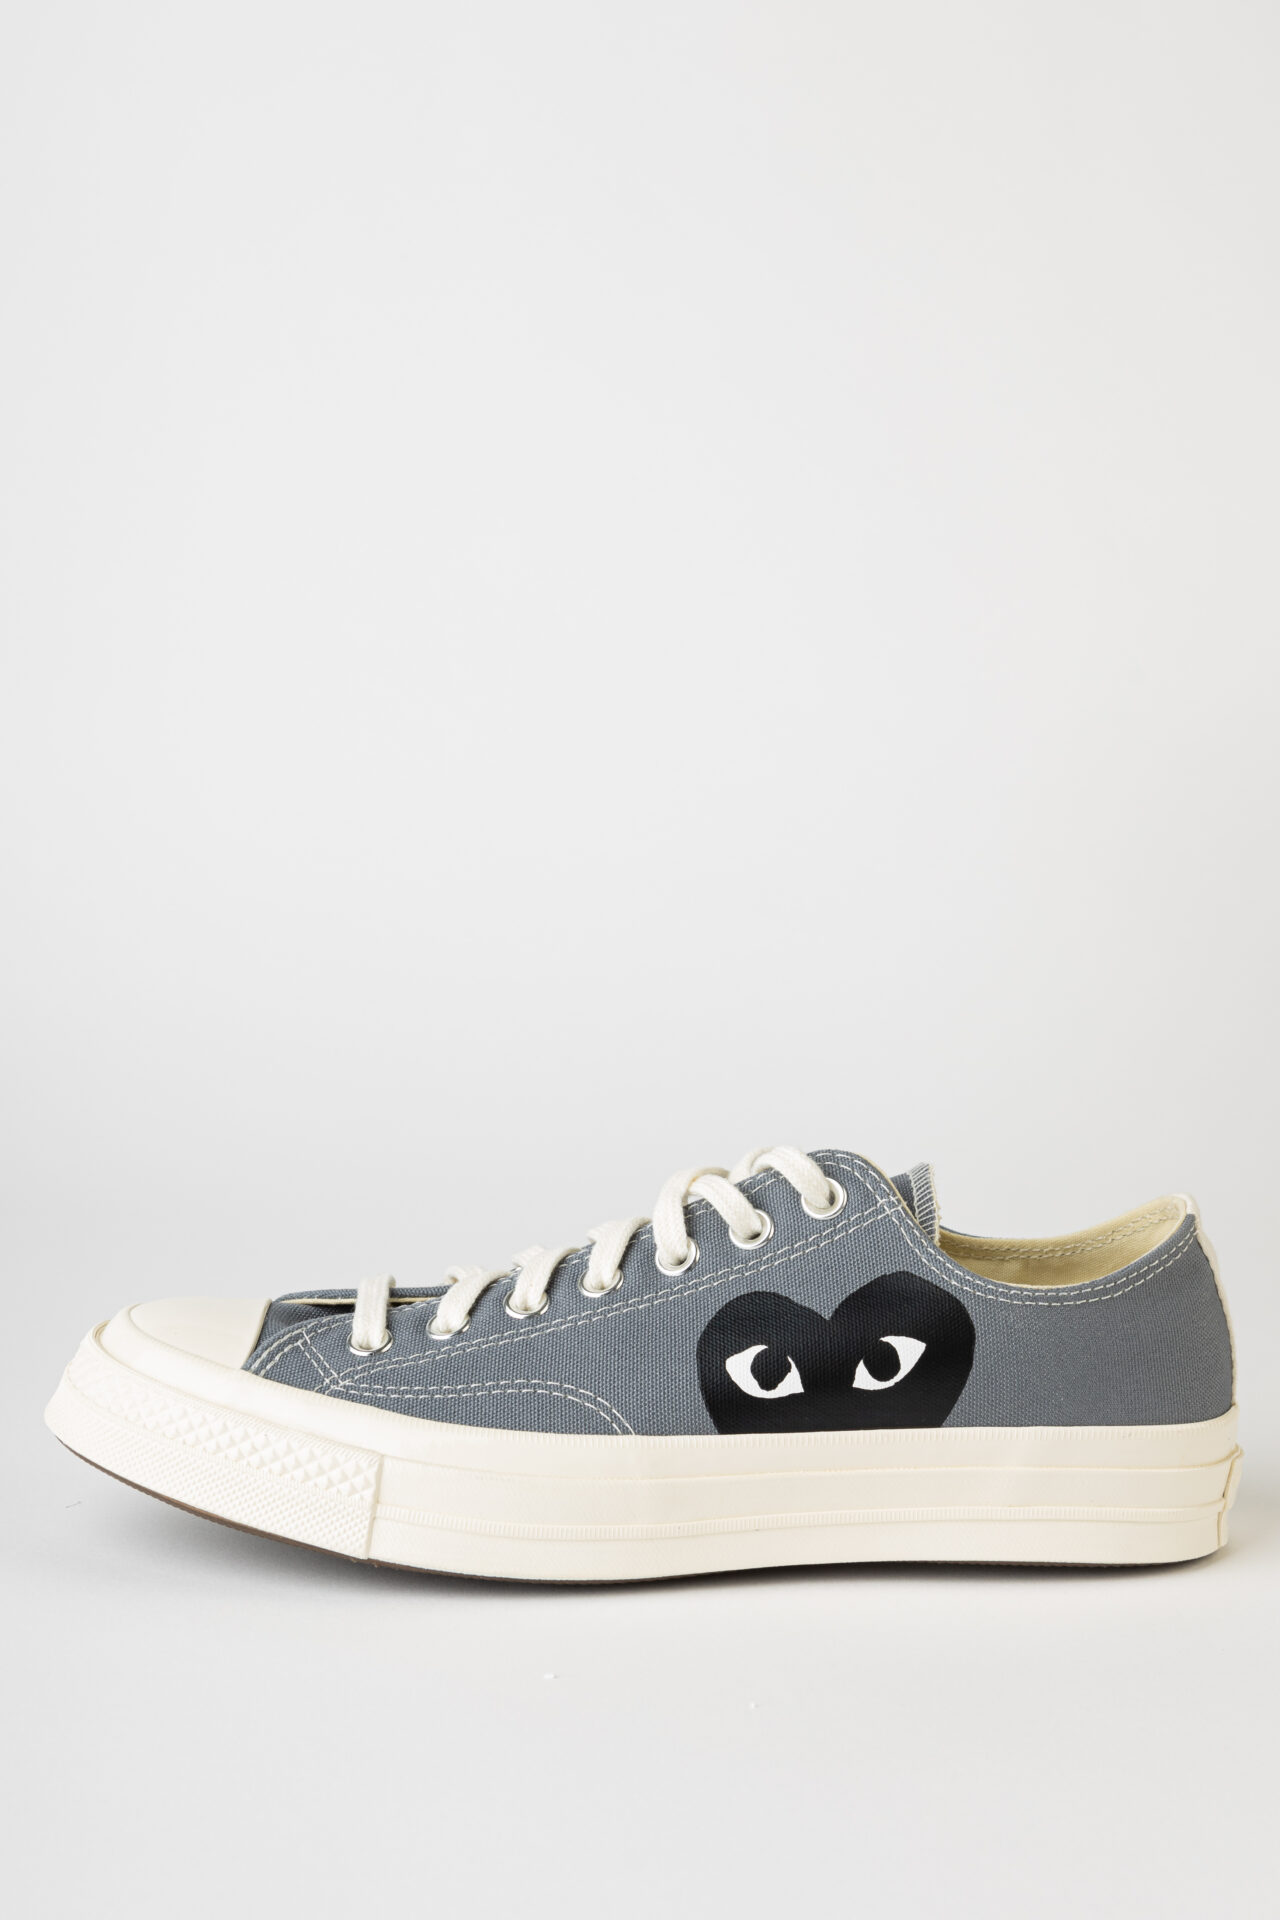 Comme Des Garcons Play - Grey Converse Chuck Taylor Low Top - Schwittenberg